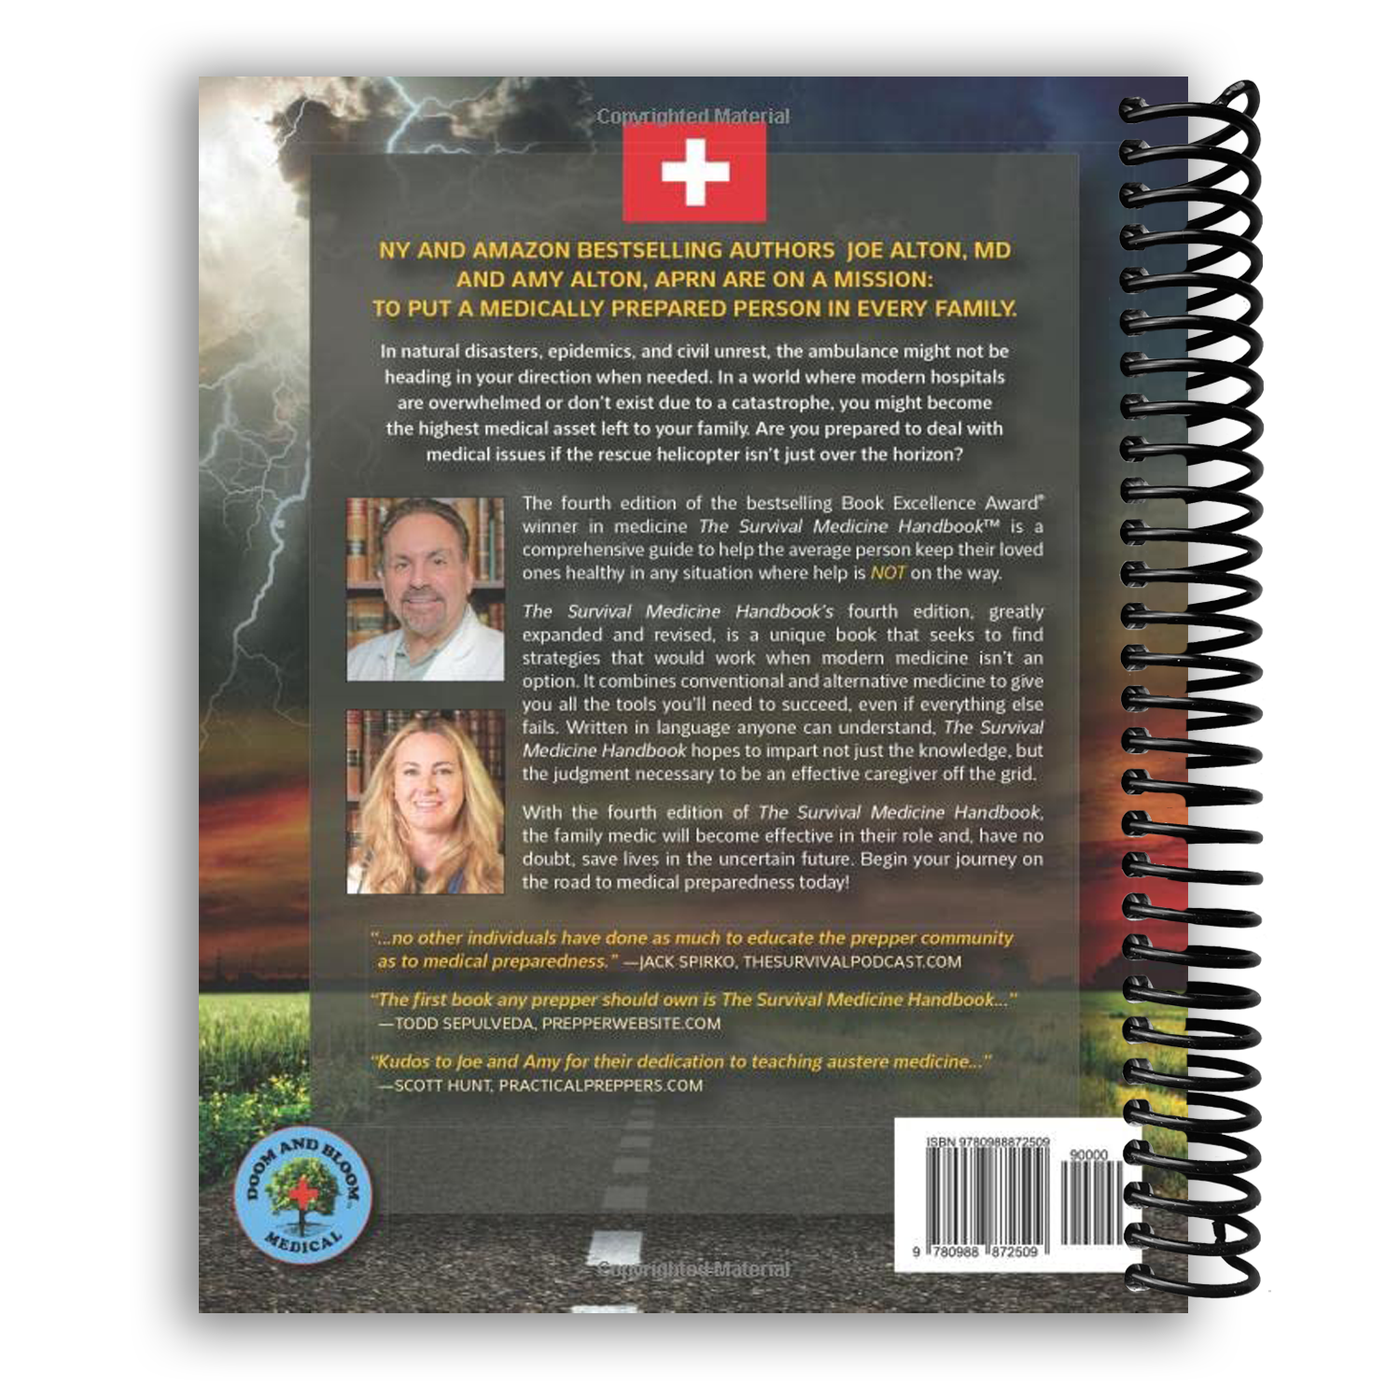 The Survival Medicine Handbook: The Essential Guide for When Help is NOT on the Way (Spiral Bound)